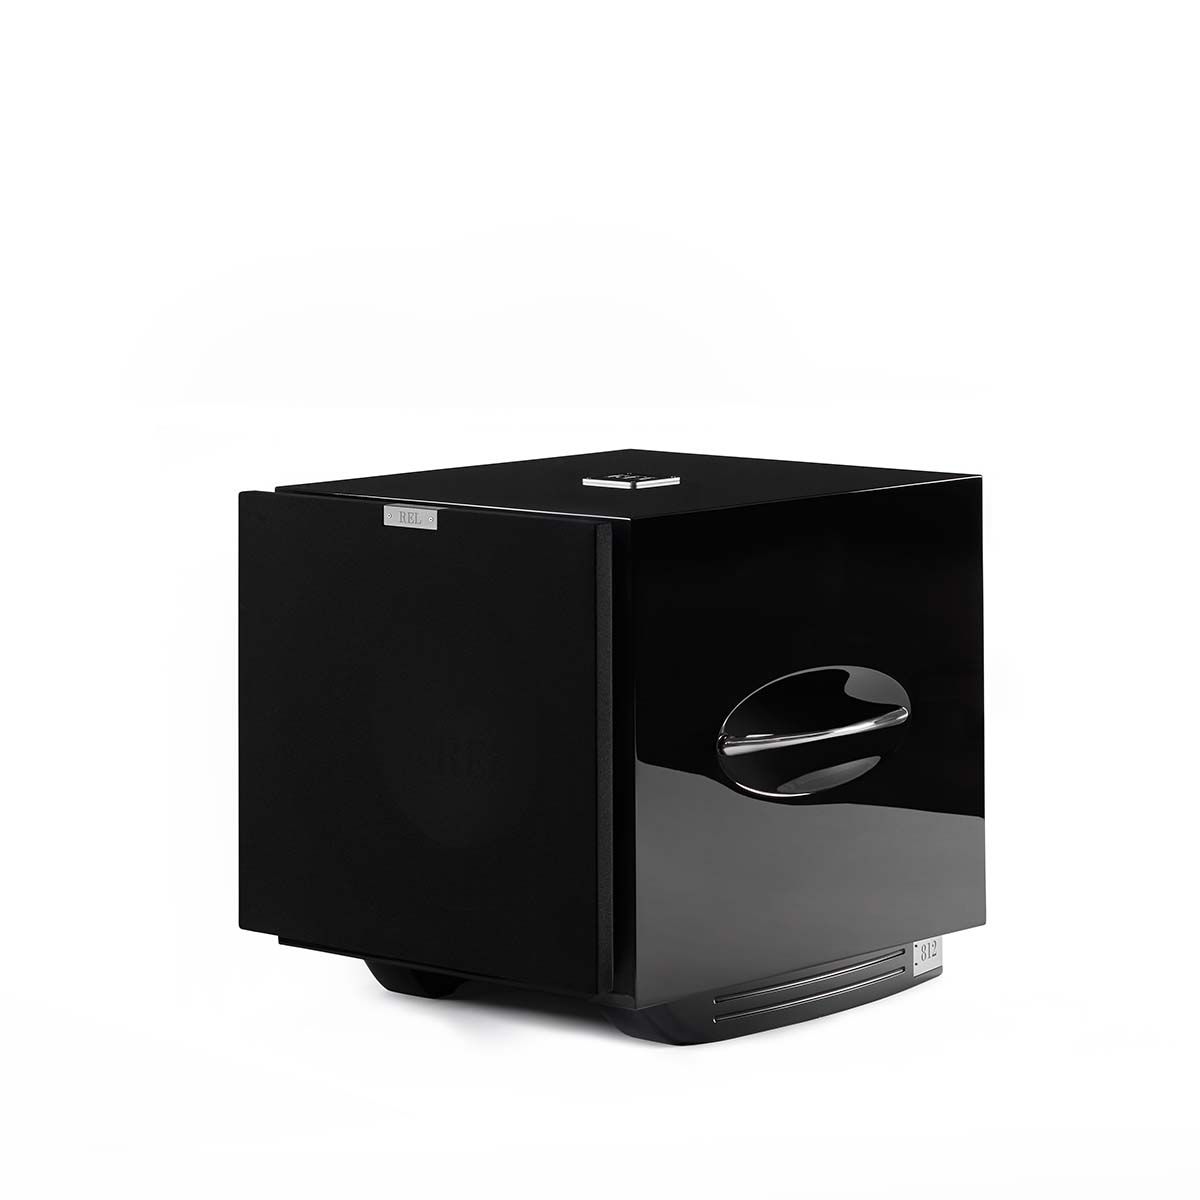 REL Acoustics S/812 Subwoofer, Black, front angle with grille